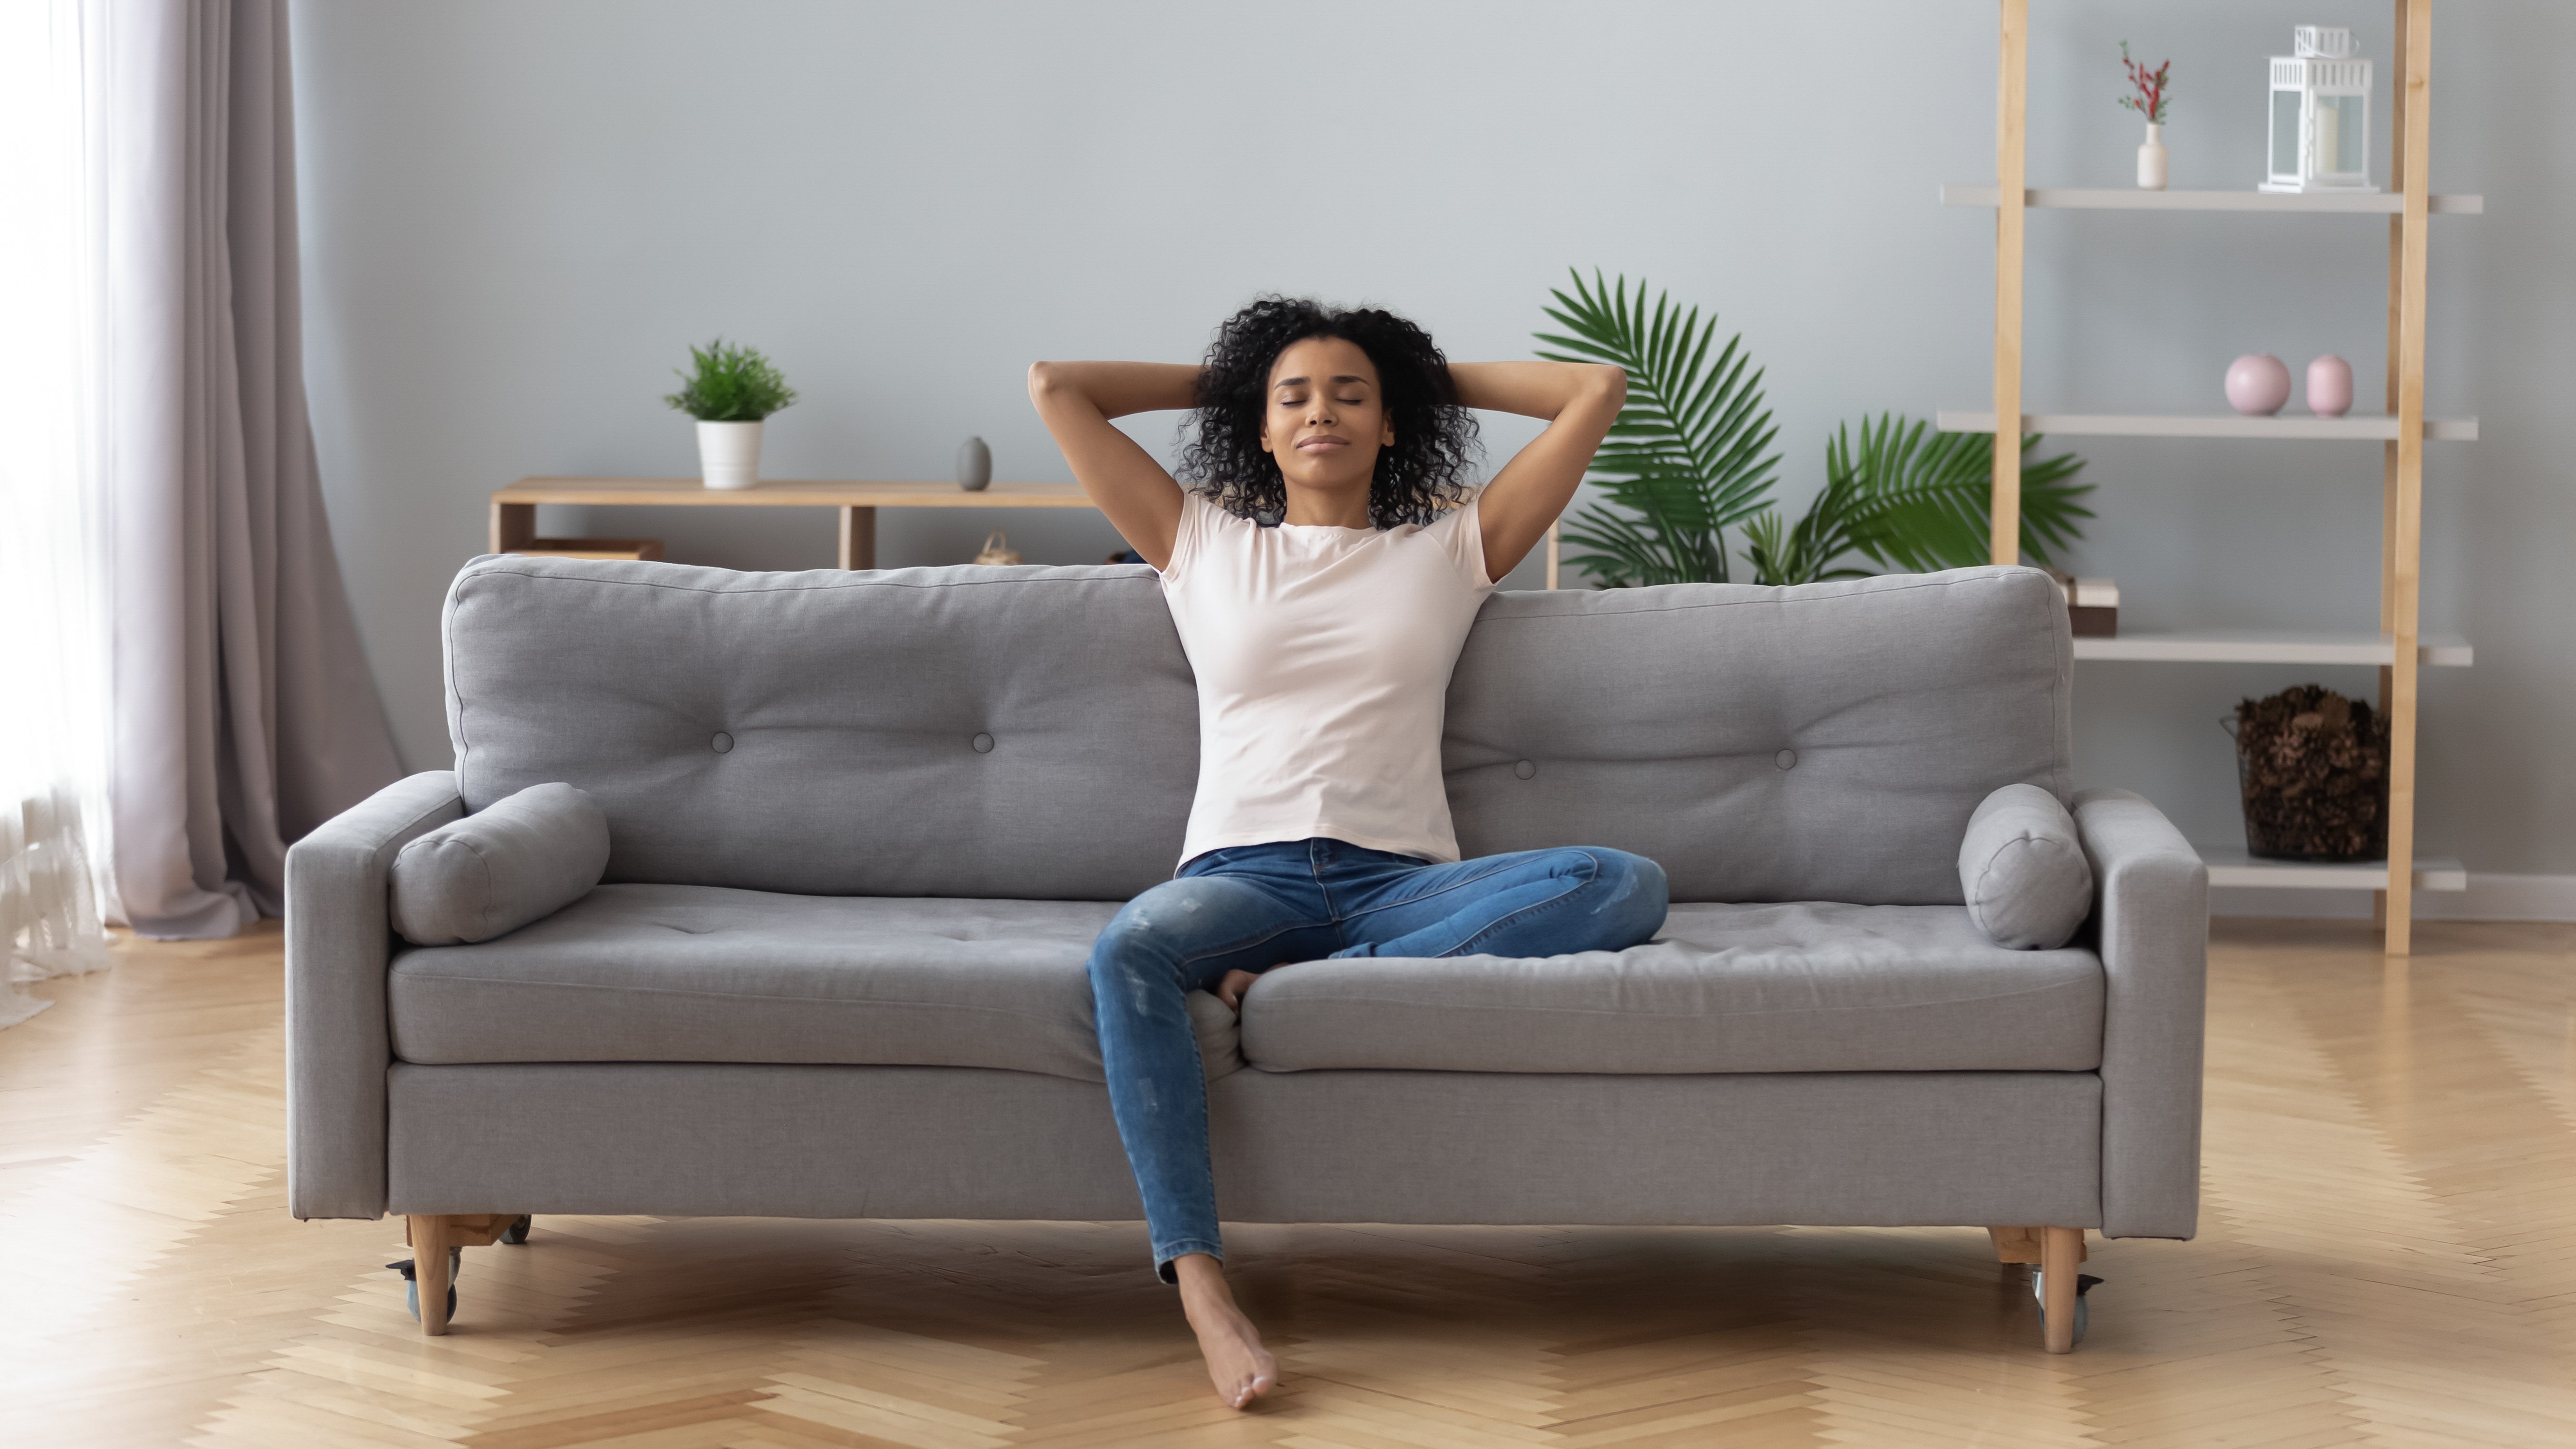 A woman relaxing on a couch 